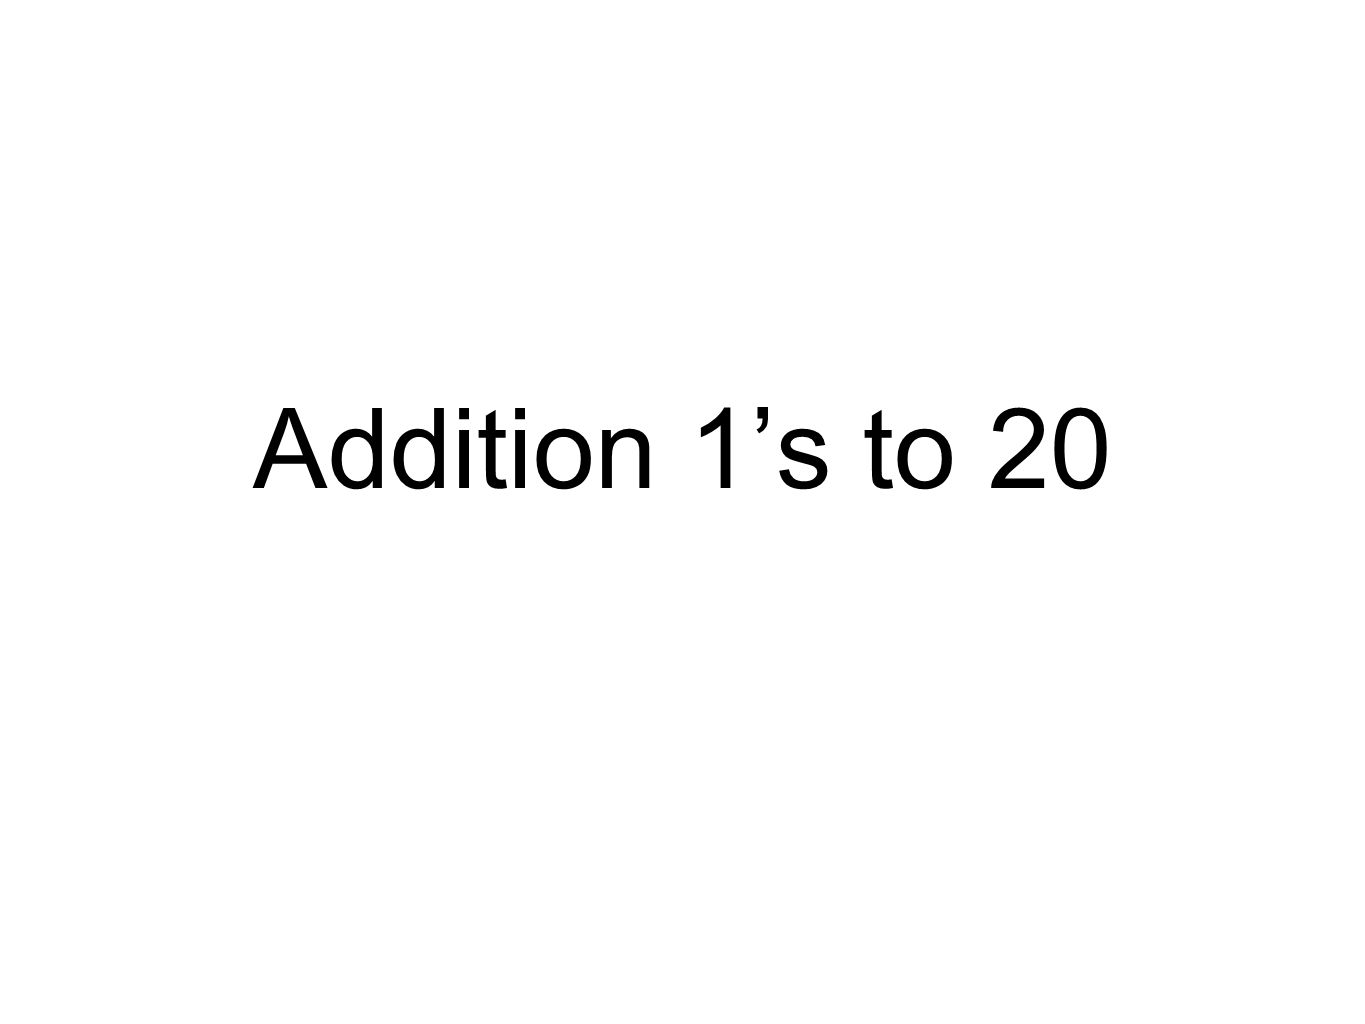 Addition 1’s to 20